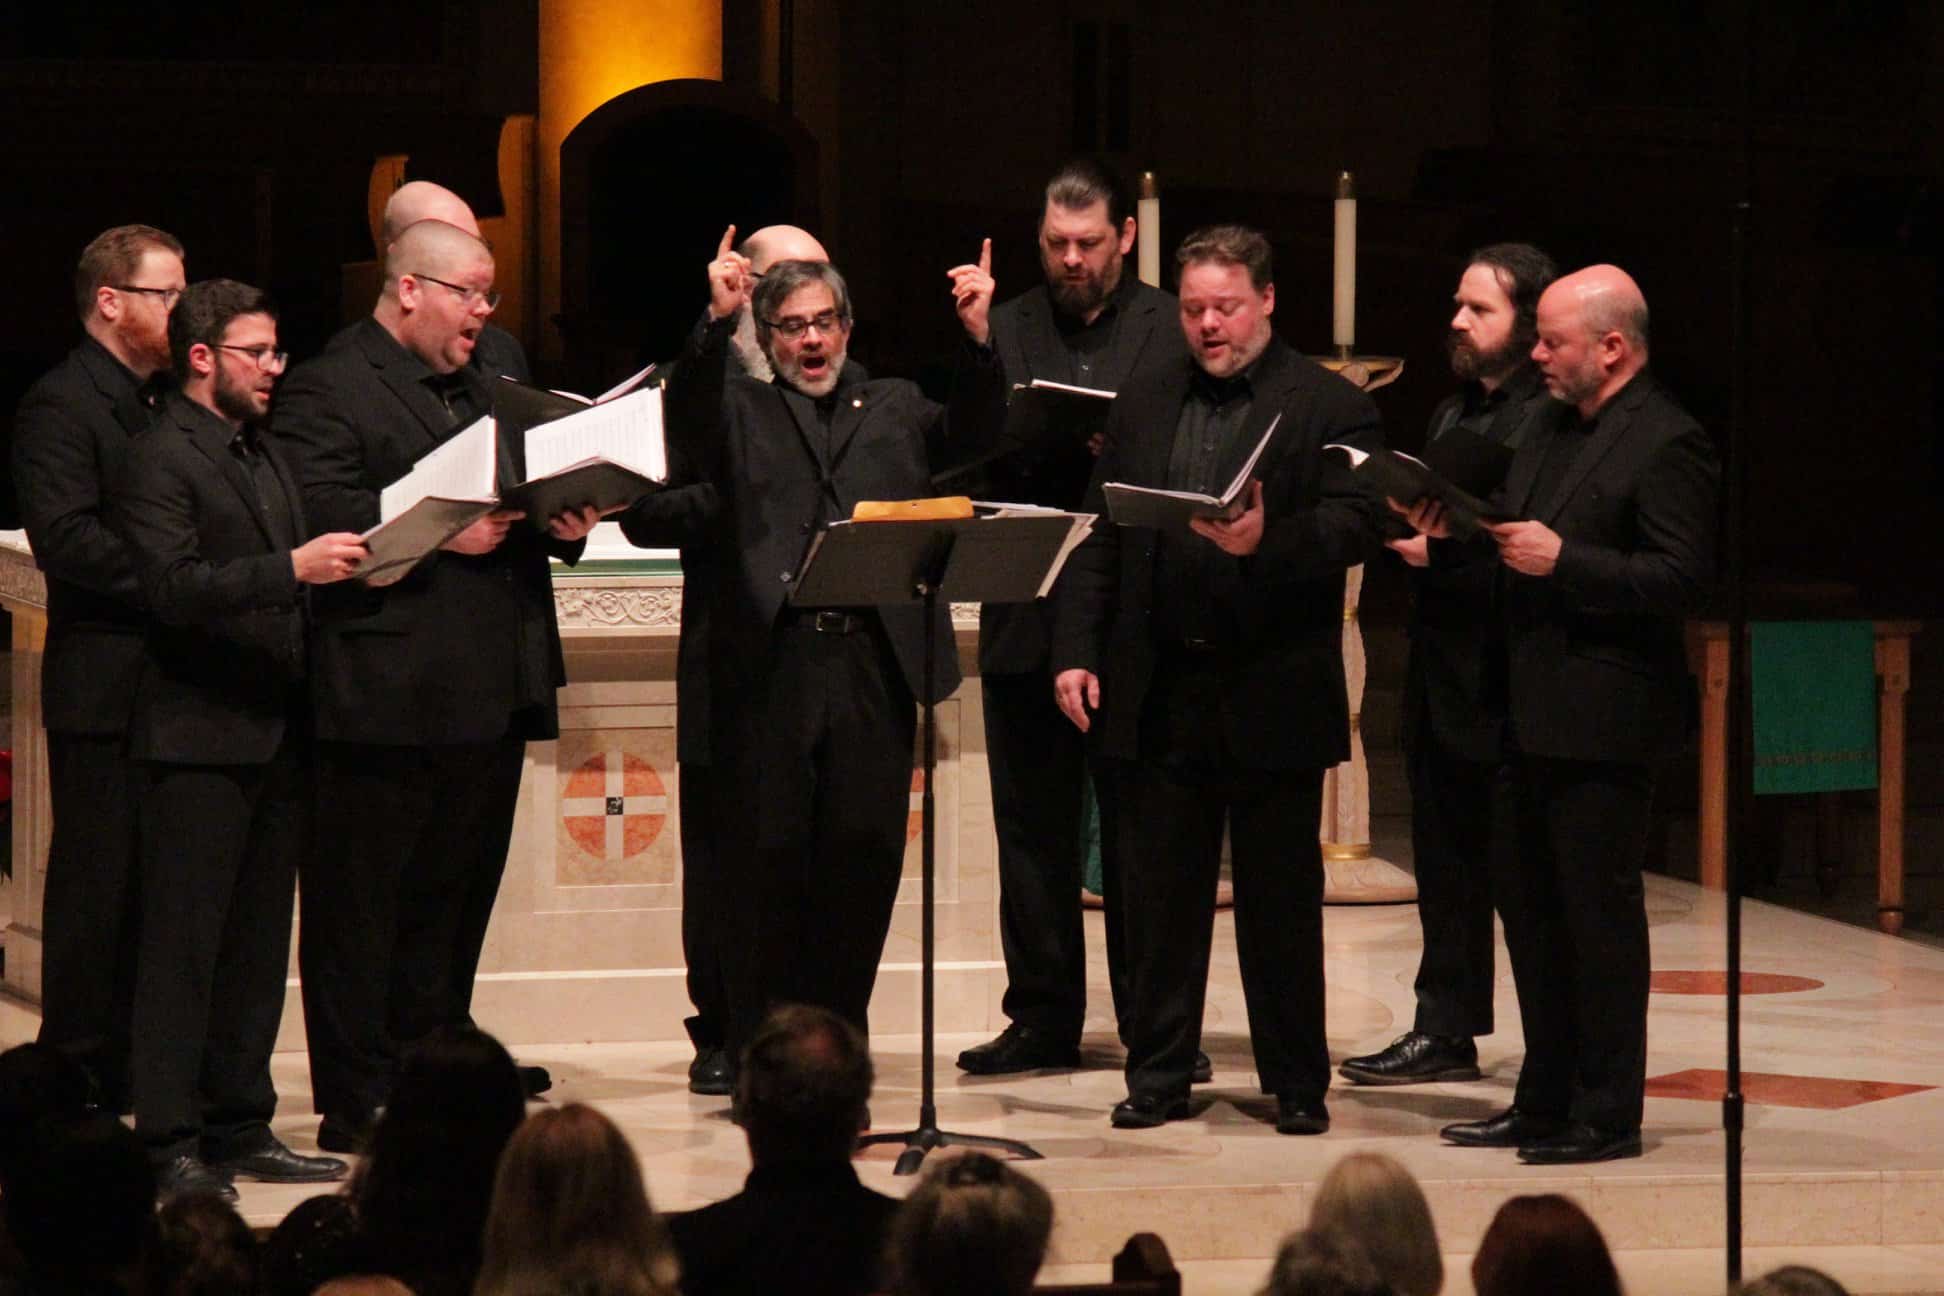 Cappella Romana to Receive $15,000 Grant from the National Endowment for the Arts